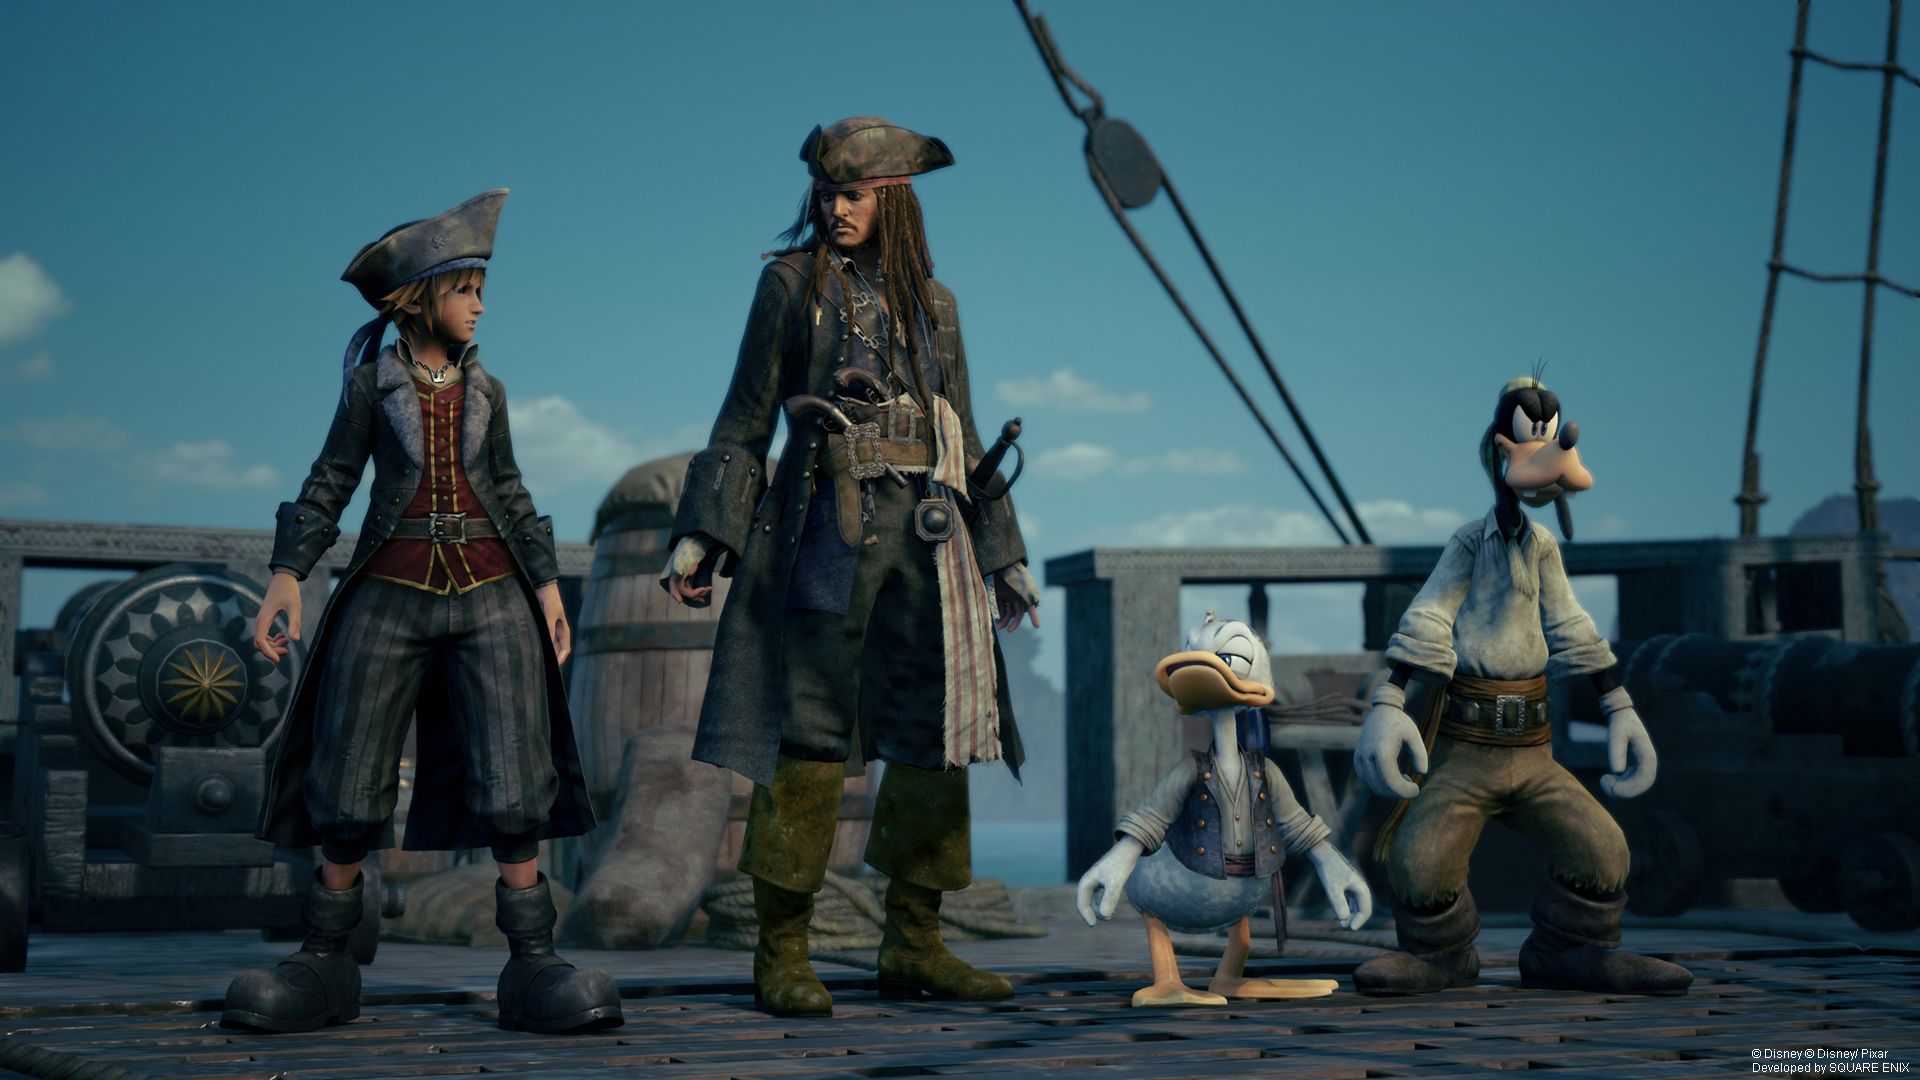 Captain Jack Sparrow (Jared Butler) welcomes old friends Sora (Hayley Joel Osment), Donald (Tony Anselmo) and Goofy (Bill Farmer) aboard the Black Pearl in Kingdom Hearts III (2019), Square Enix via Square Enix